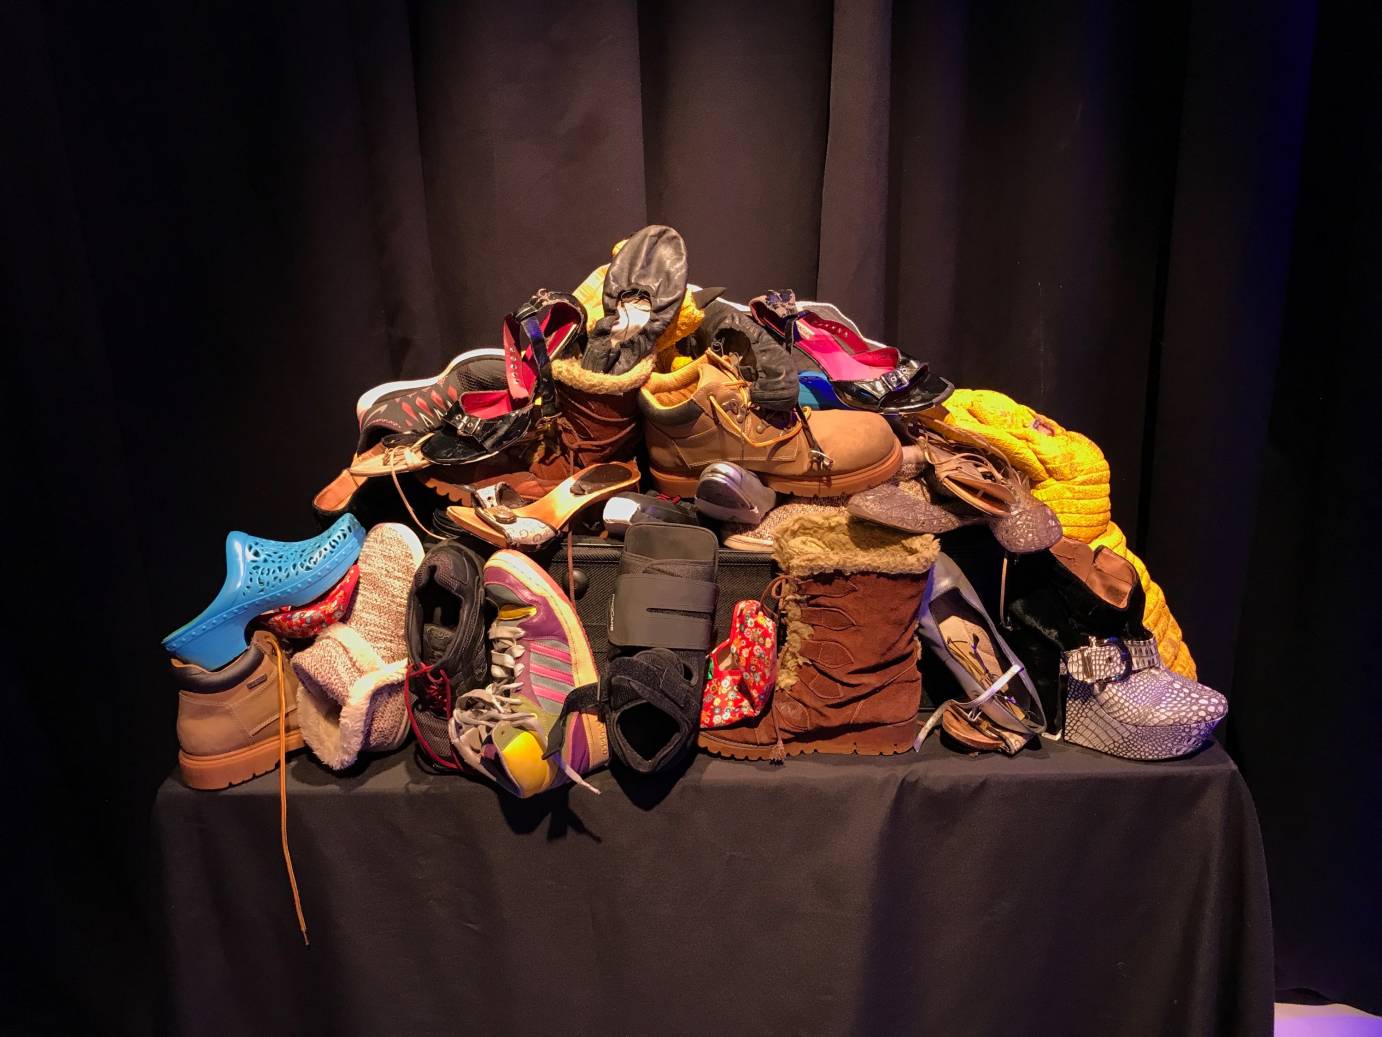 A pile of shoes on a black suitcase